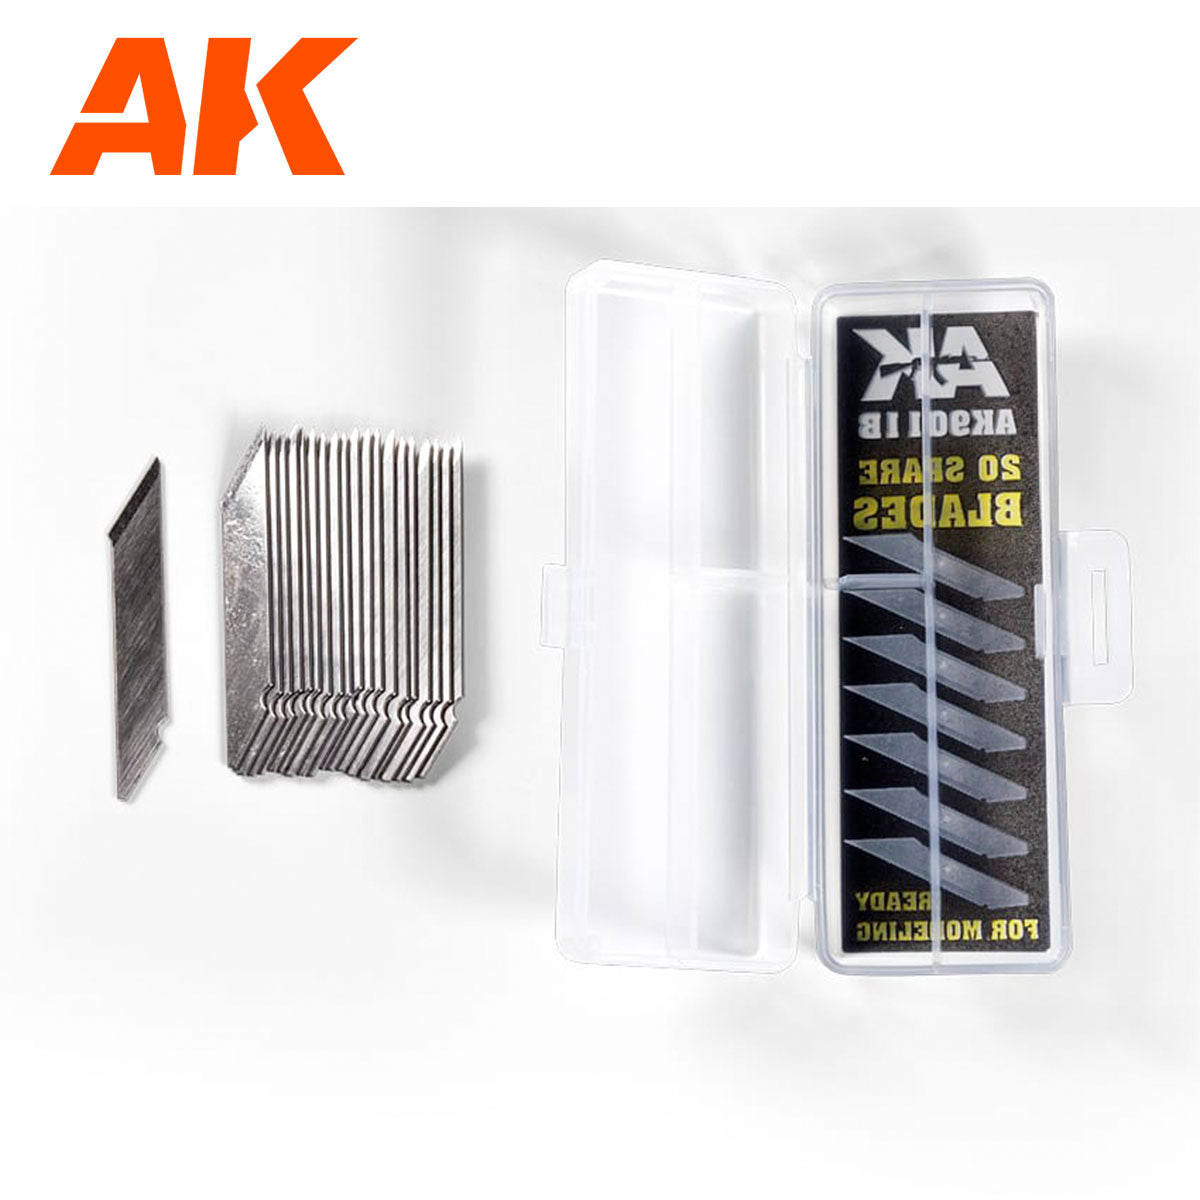 AK Interactive Cutter 20 Spare Blades AK9011B - Loaded Dice Barry Vale of Glamorgan CF64 3HD